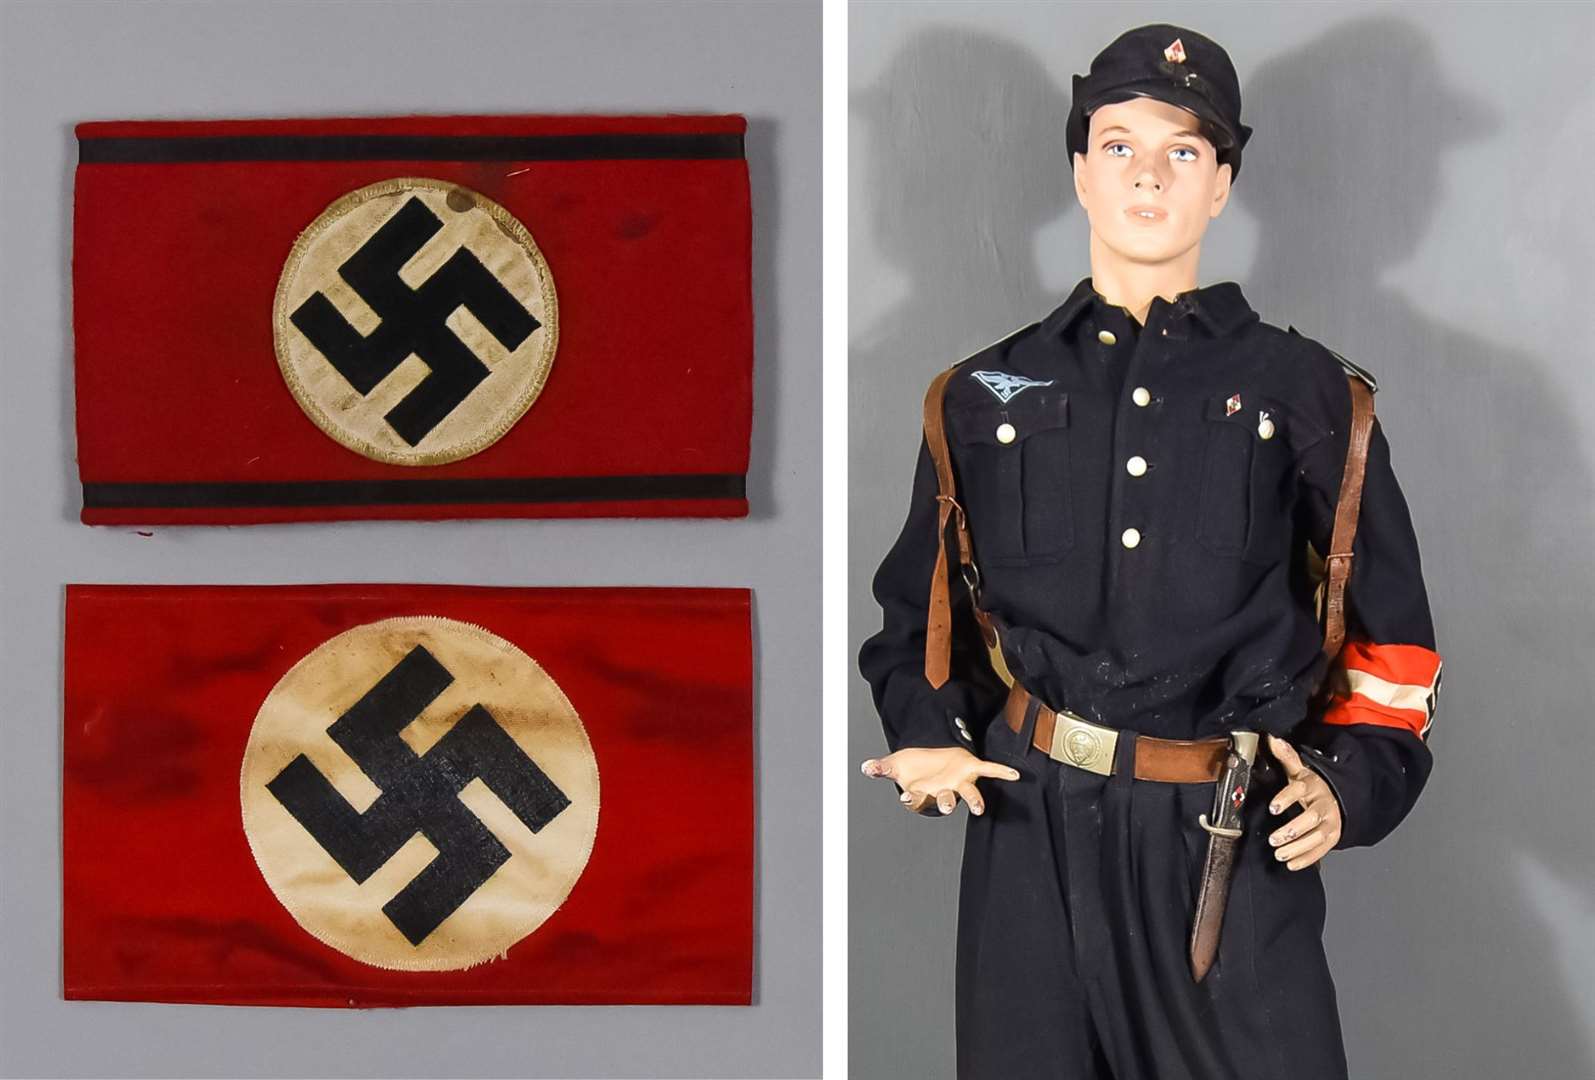 Some of the Nazi memorabilia, including a Hitler Youth uniform, advertised on The Canterbury Auction Galleries website